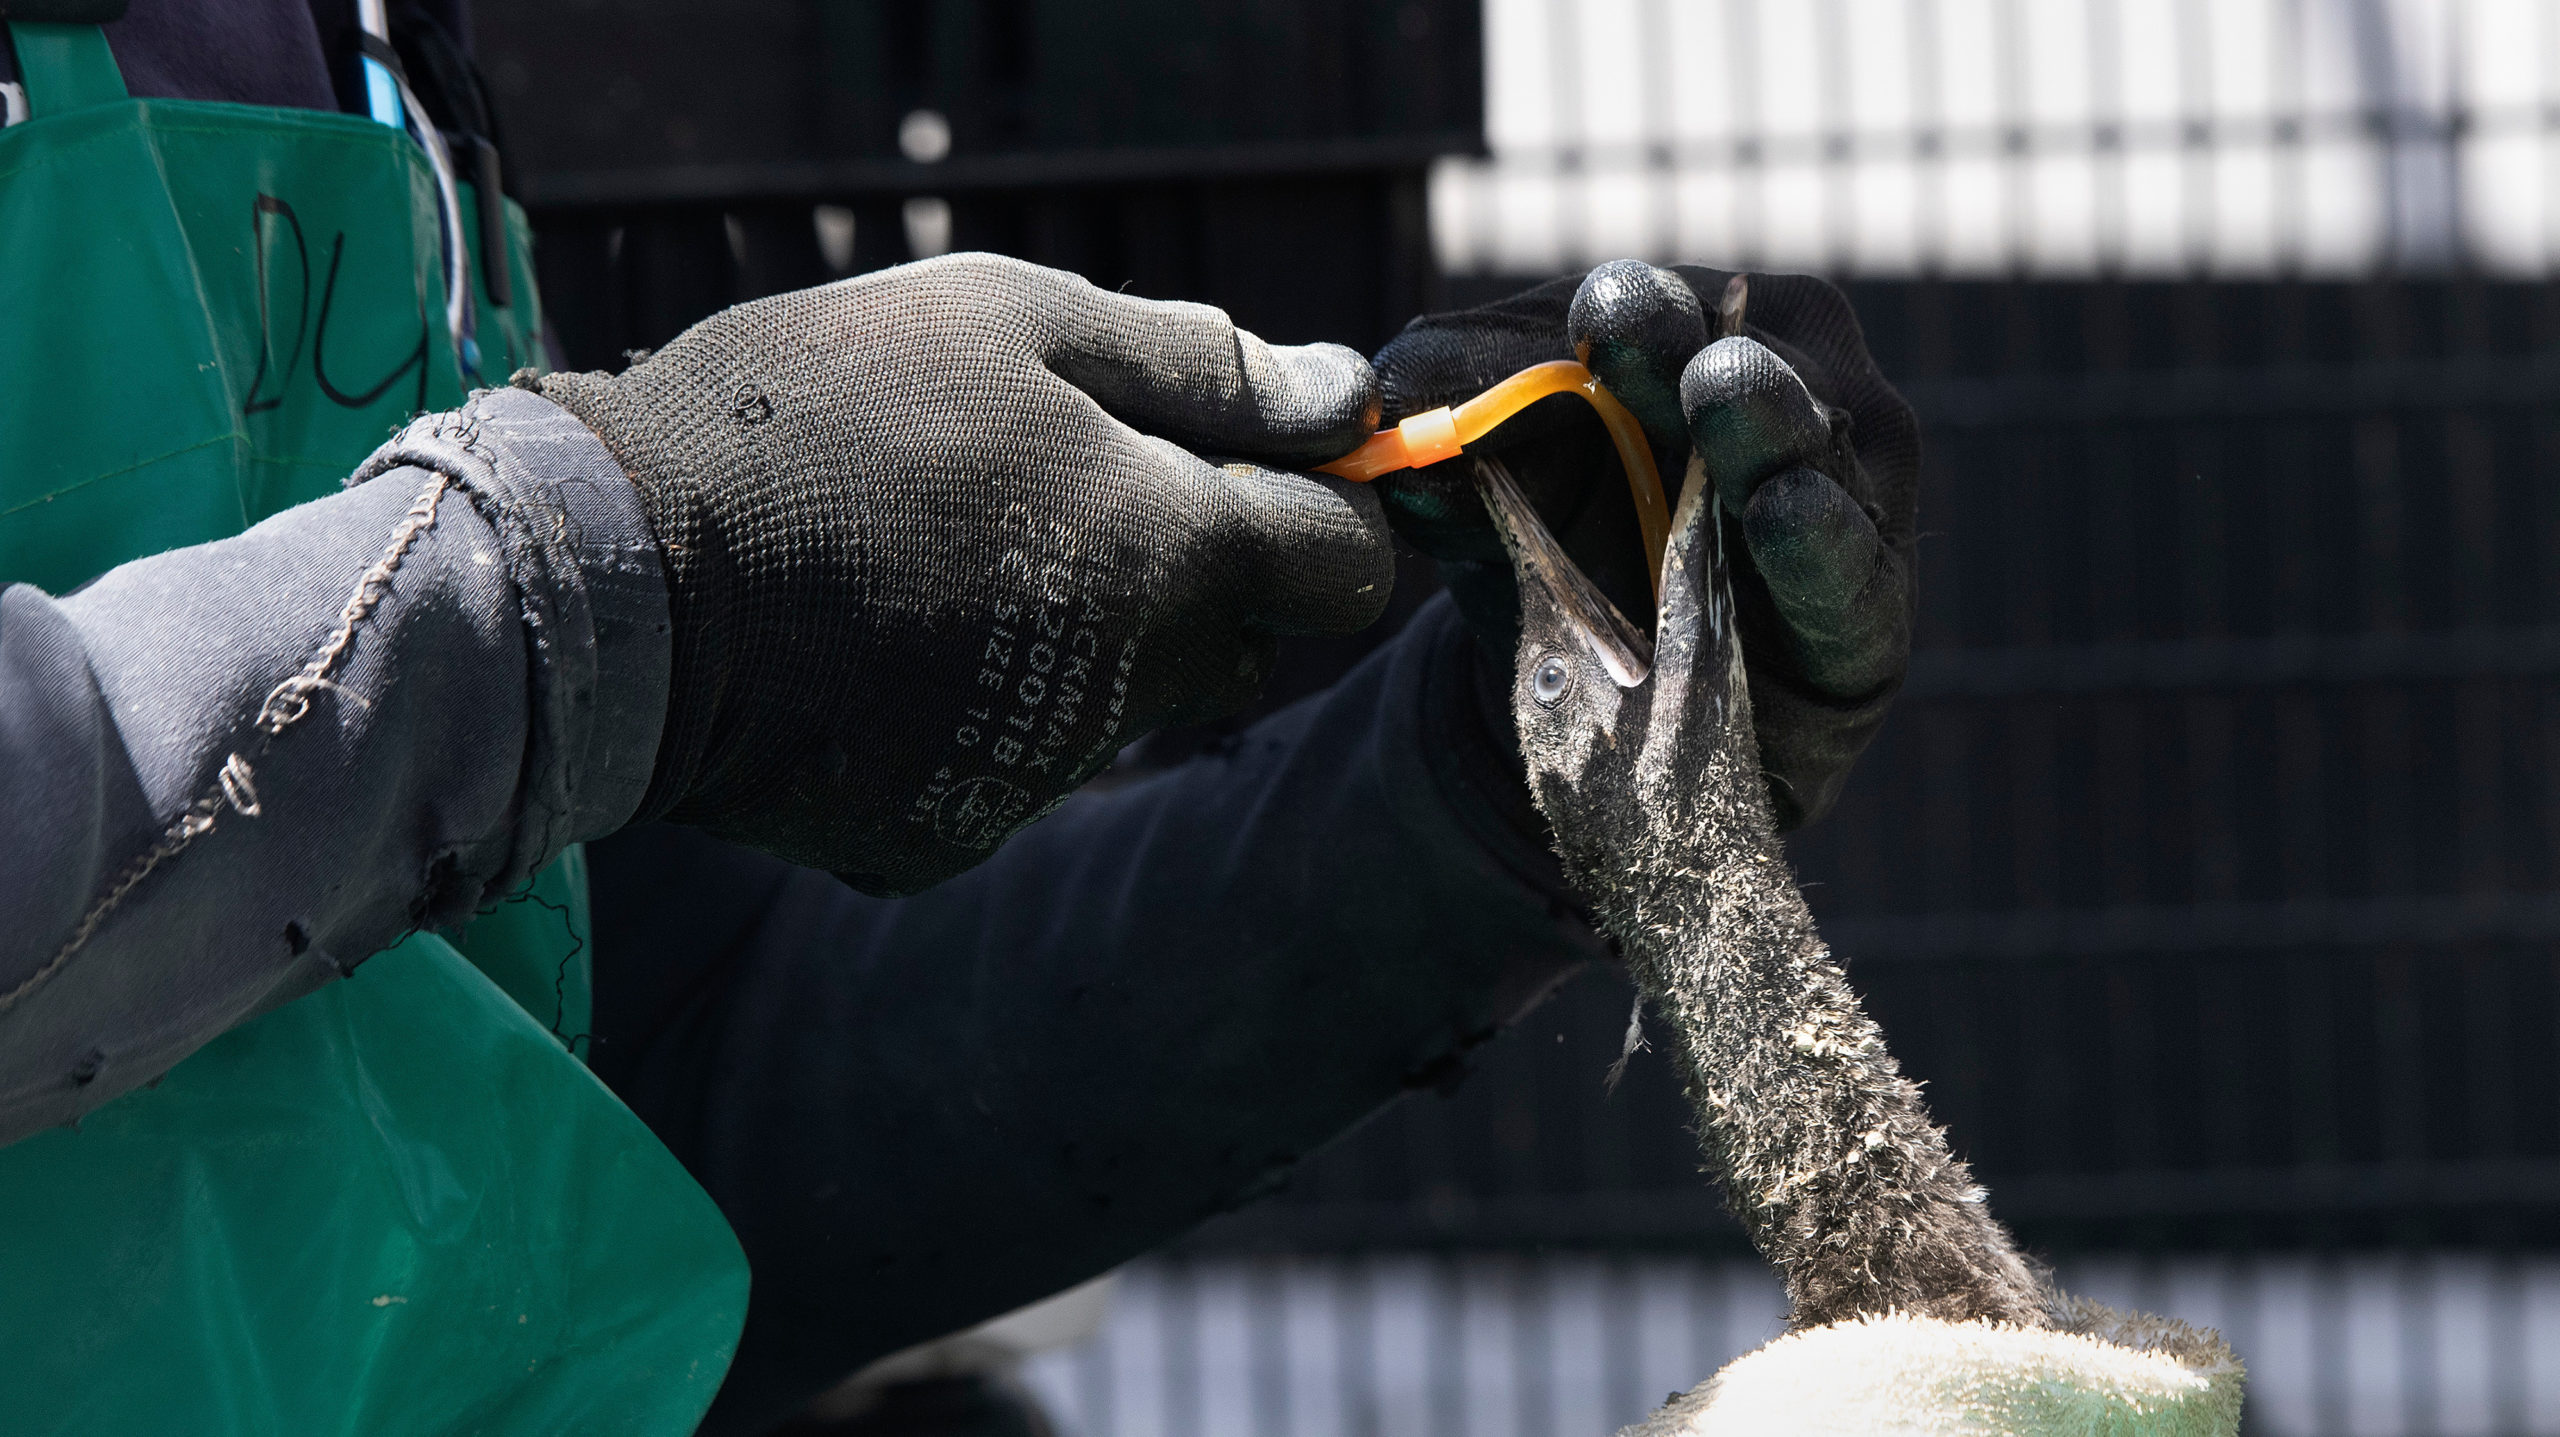 A volunteer gives a mixture of water and supplements to one of the 1,200 Cape cormorant chicks. (Photo: Rodger Bosch / AFP, Getty Images)